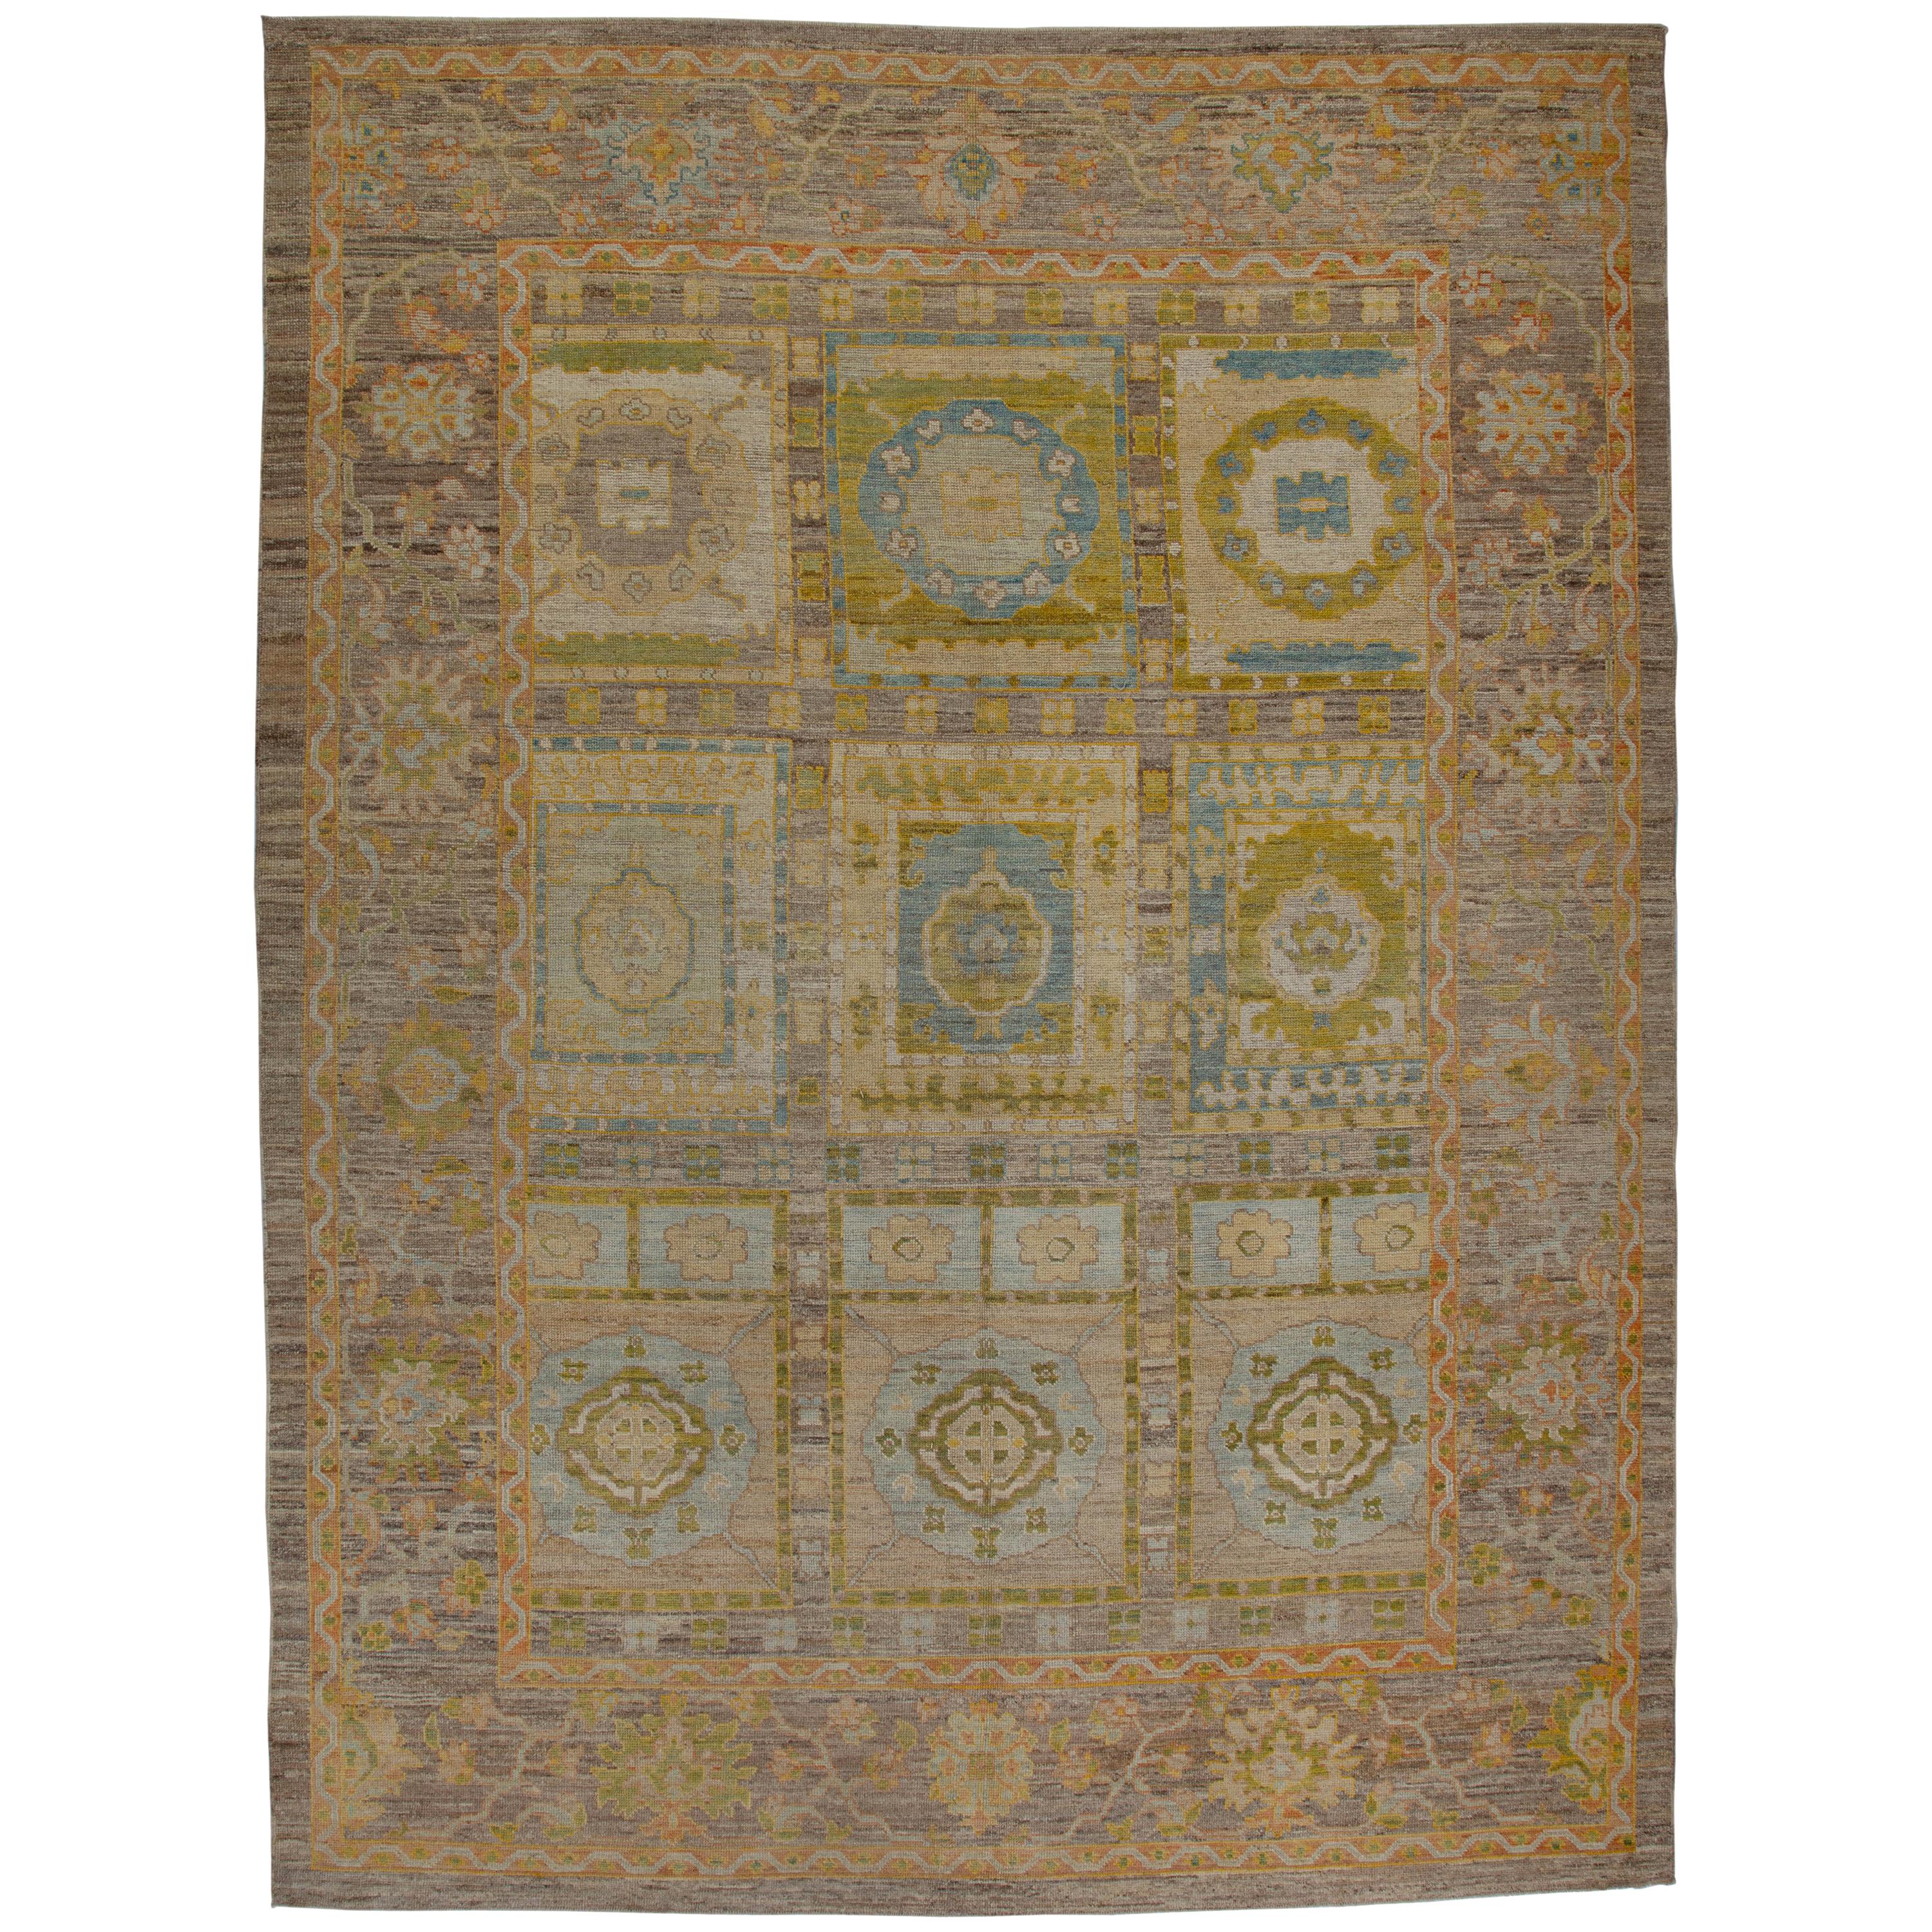 New Turkish Oushak Rug with Mixed Geometric and Floral Details For Sale